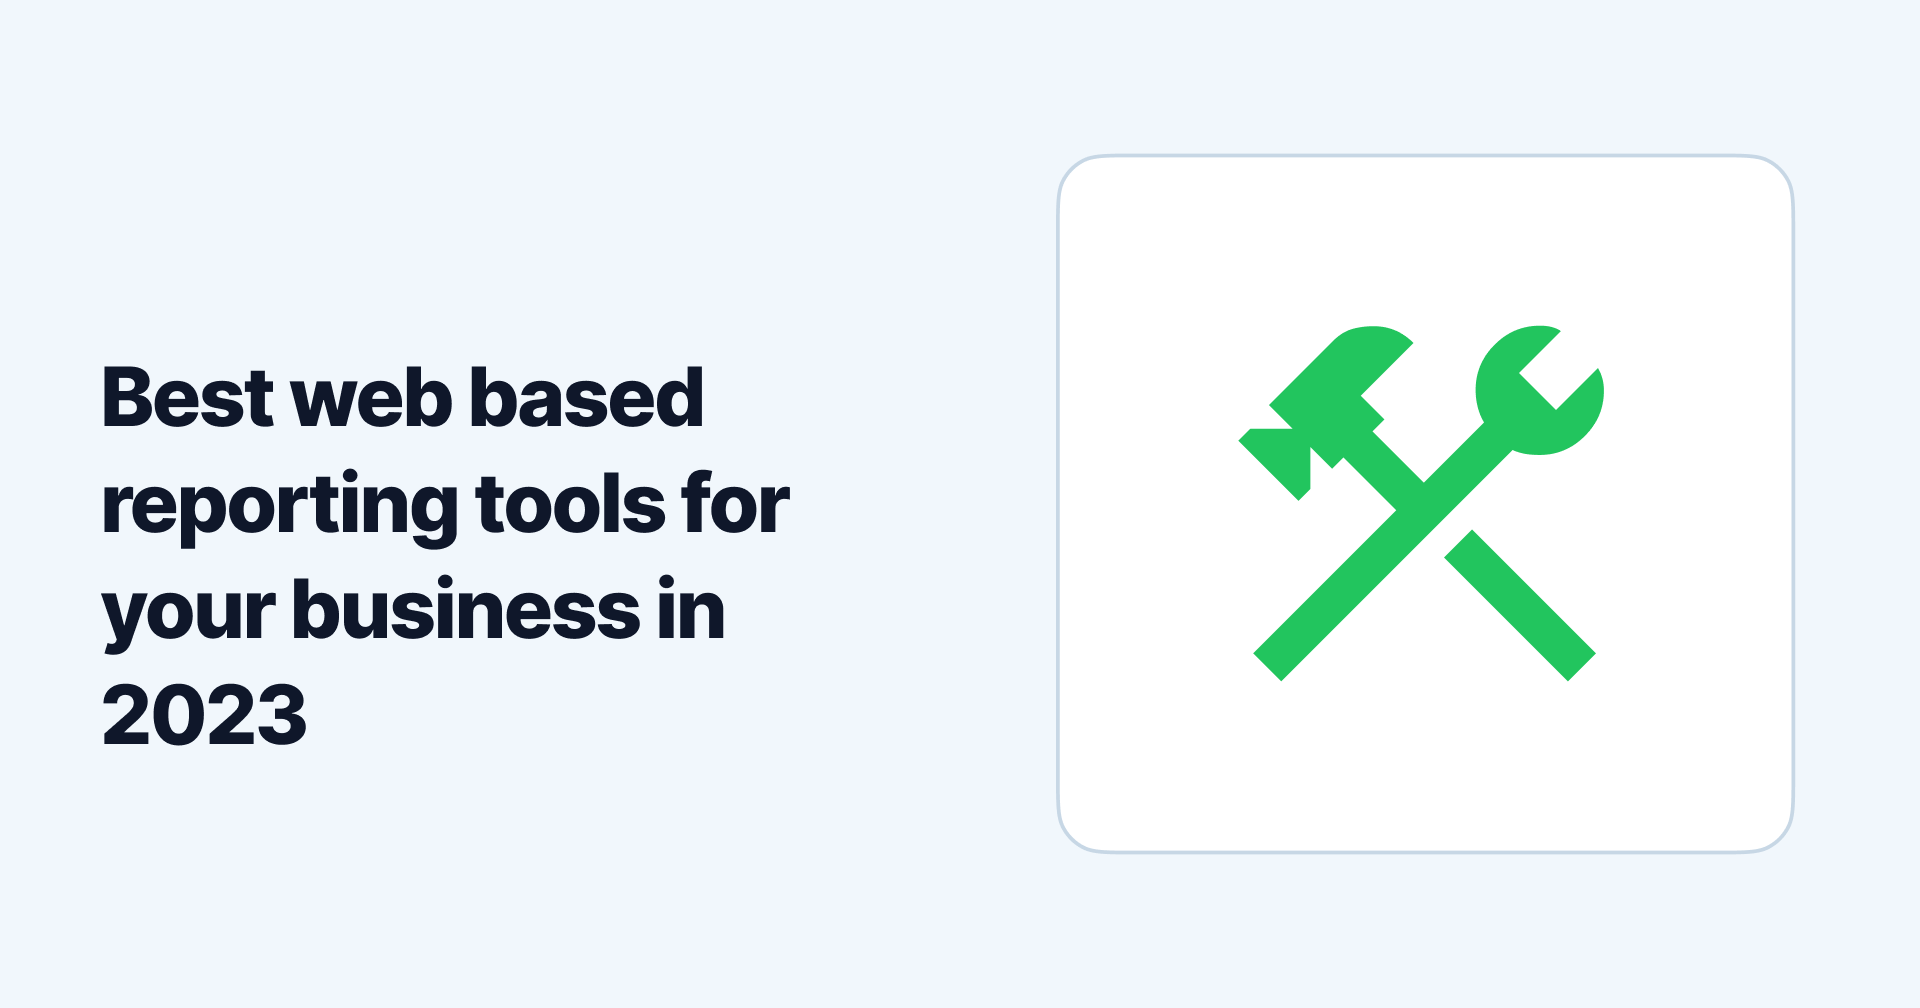 Best web based reporting tools for your business in 2023